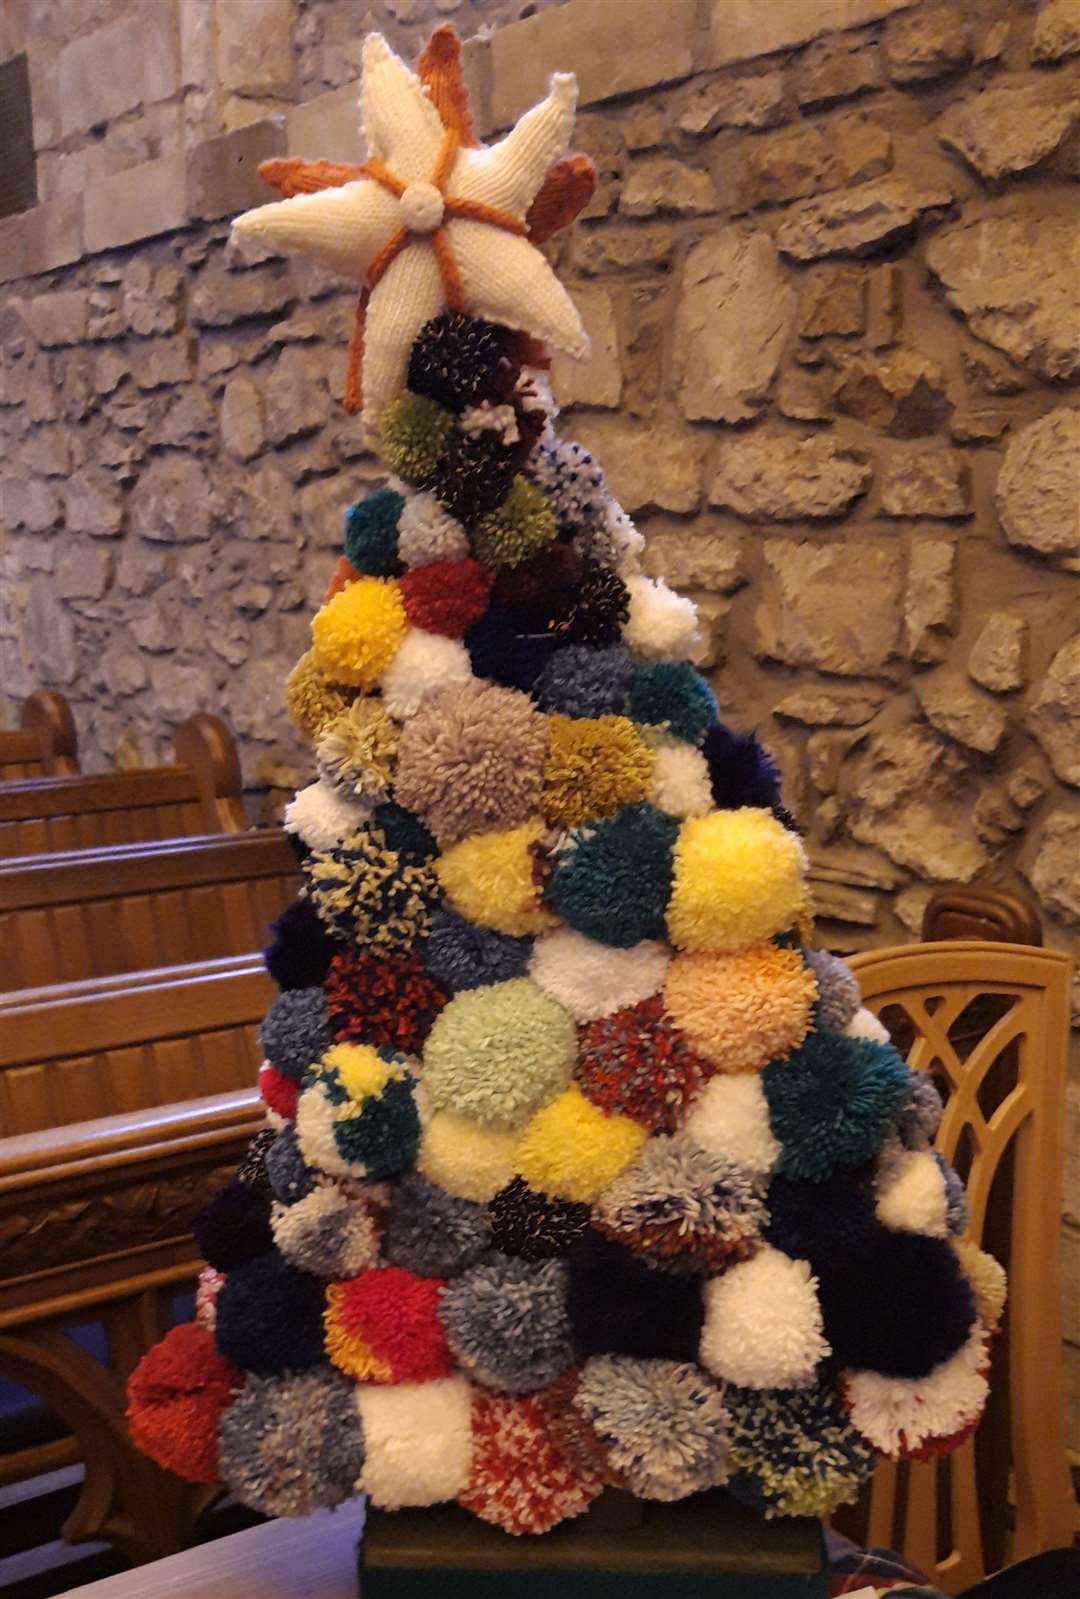 A pom pom tree from Knit and Natter.